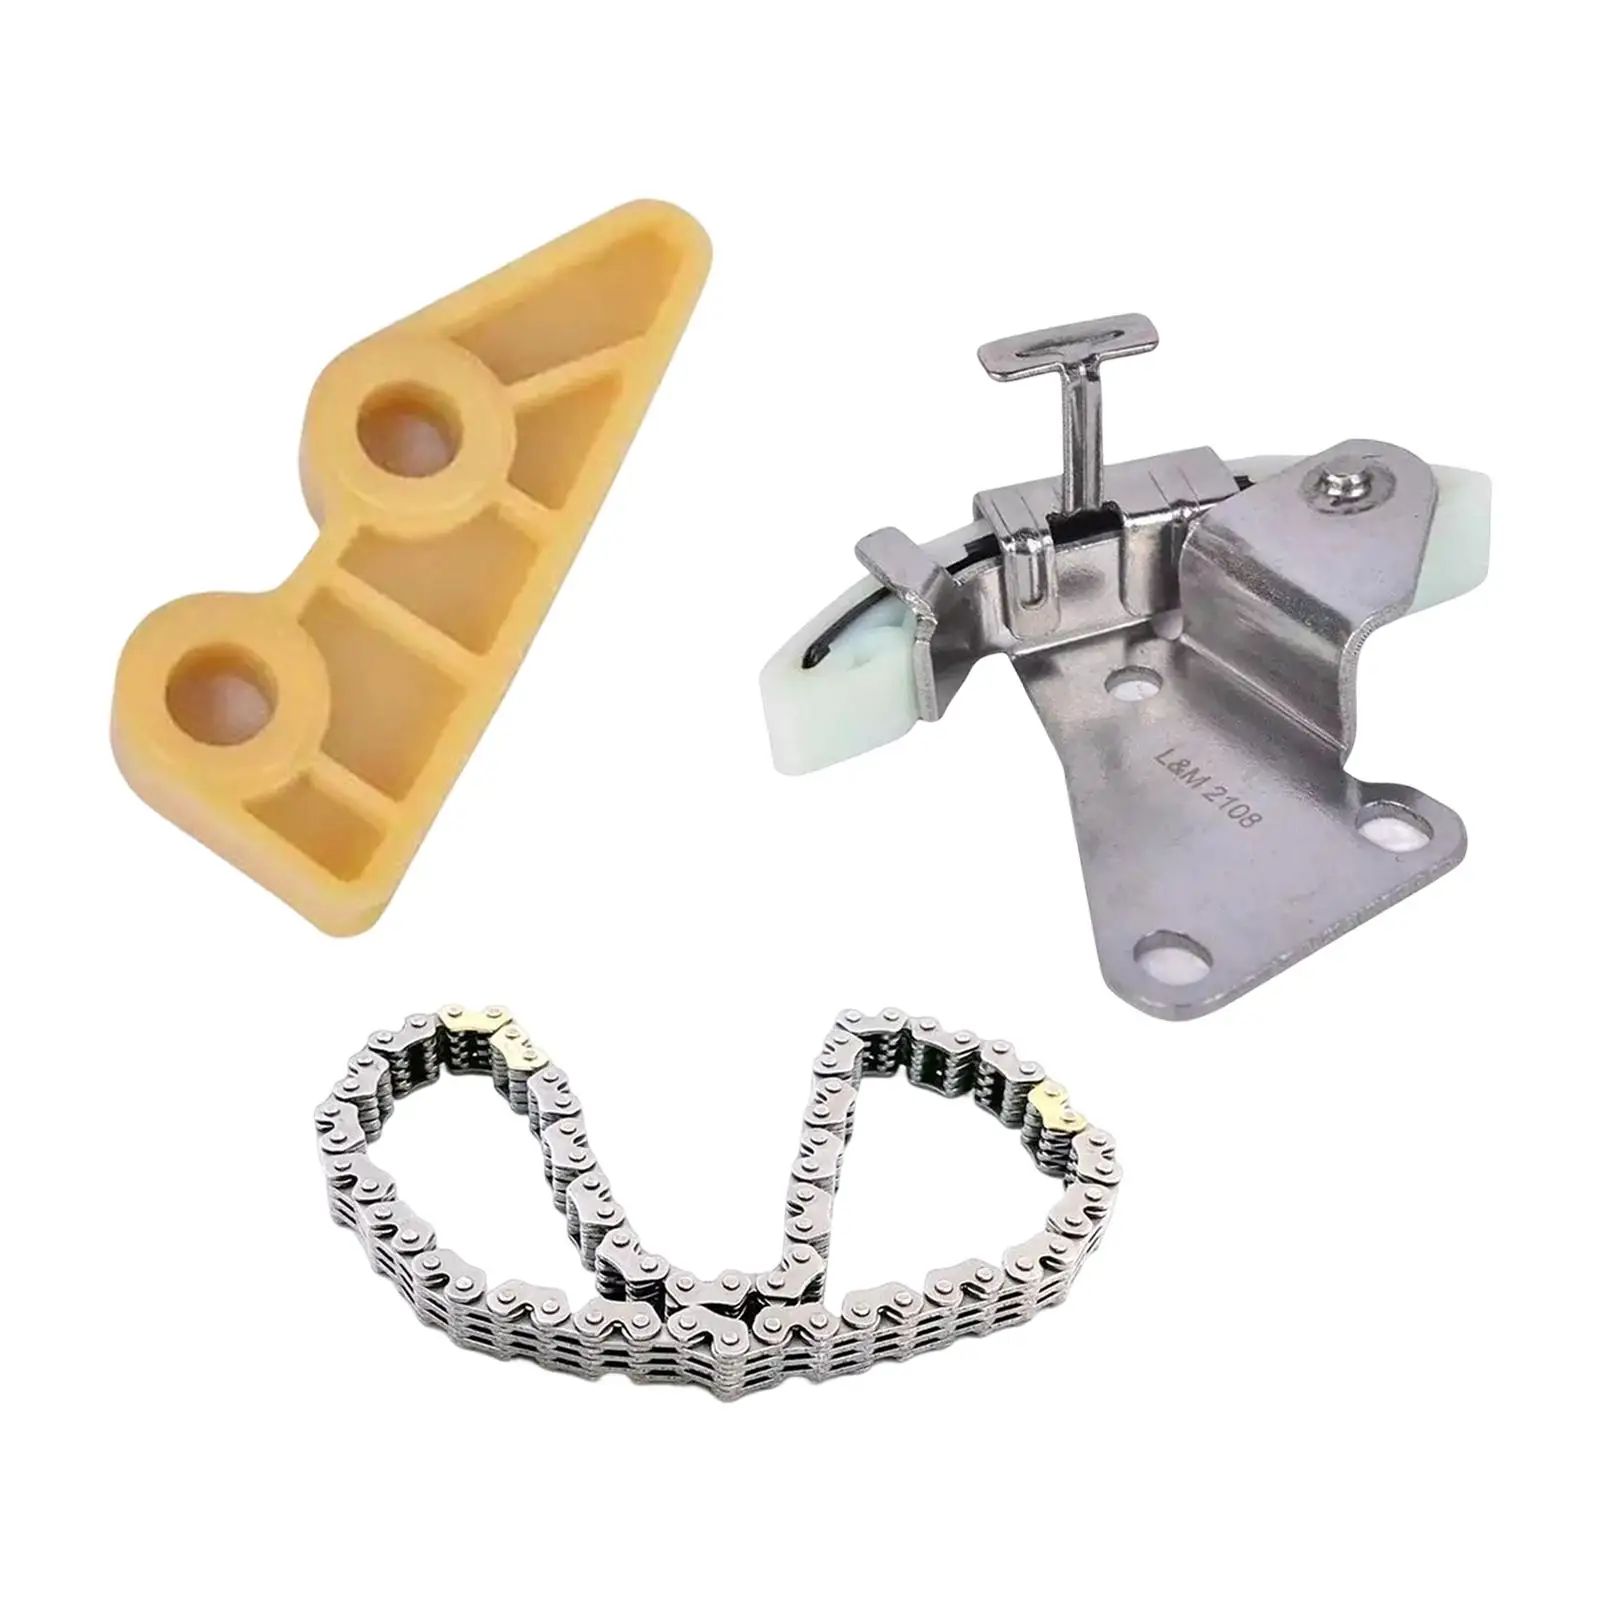 Automobile Oil Pump Chain Tensioner Guide Kit 13460-Pnc-004 for Honda Replaces Stable Performance Easily Install Durable